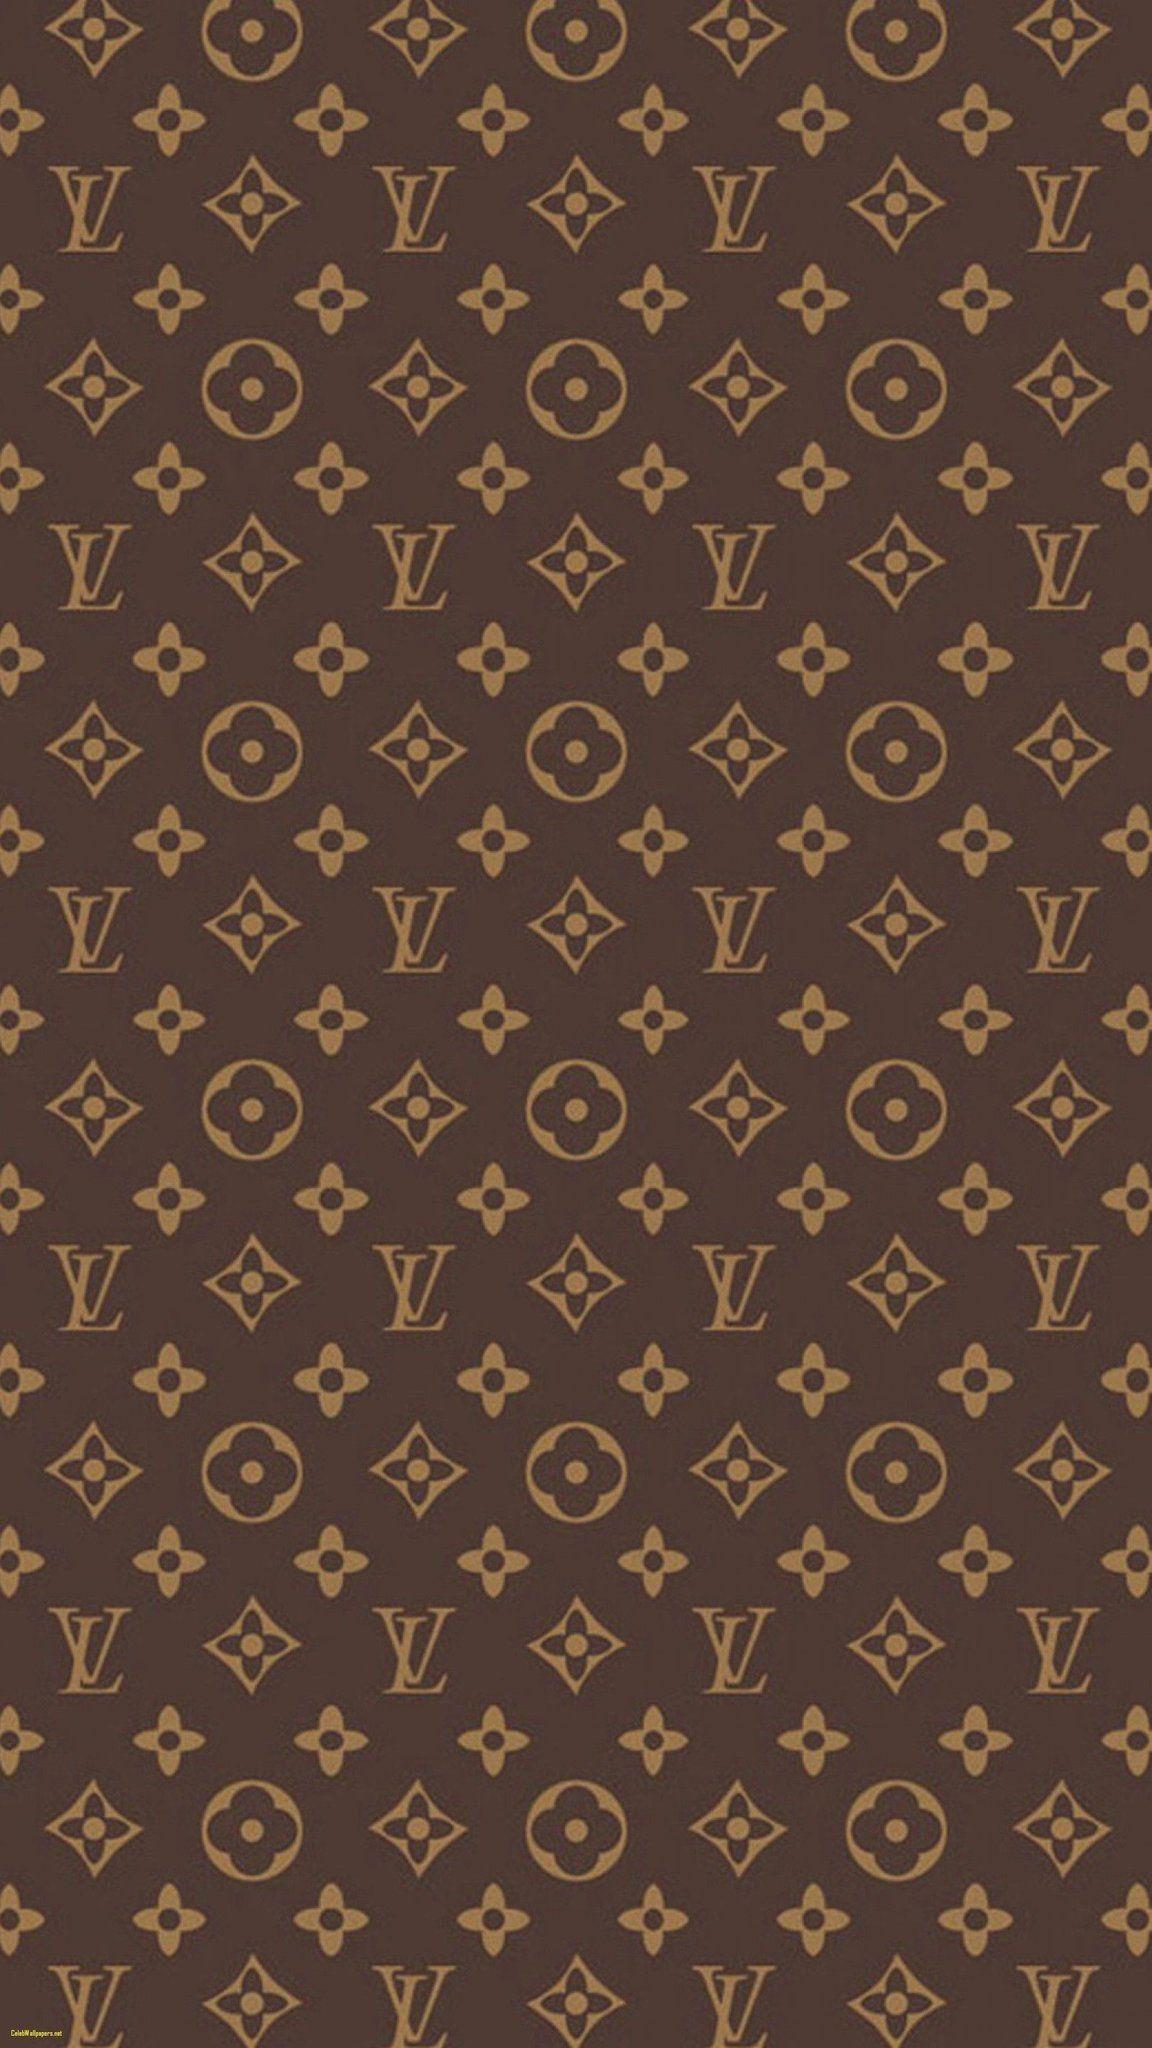 Pin by alexis on Aesthetic collage  Louis vuitton iphone wallpaper, Louis  vuitton red, Louis vuitton pattern